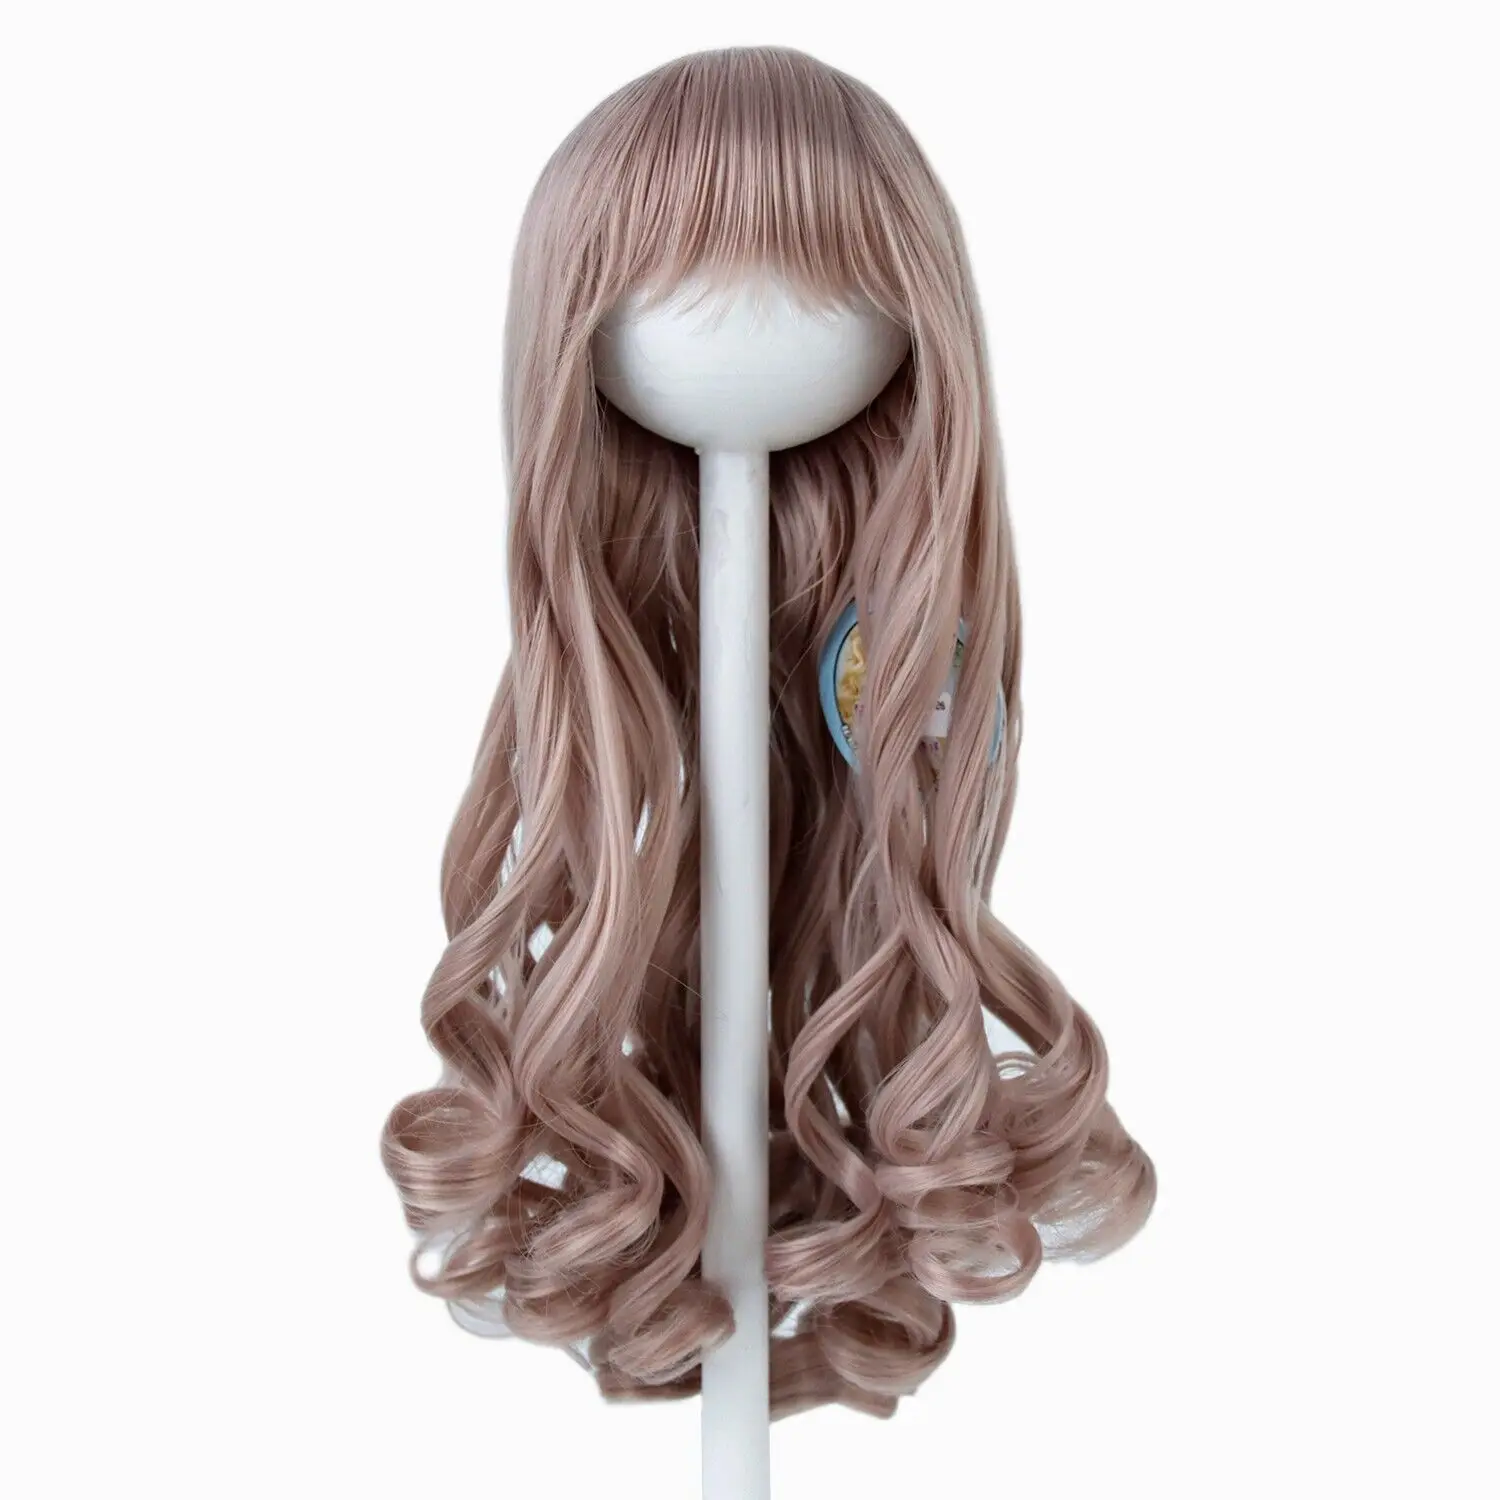 18'' American Doll Wigs Long Curly Coffe Colour With Bangs Hair For Girls Doll Wig 26-28cm head circumference